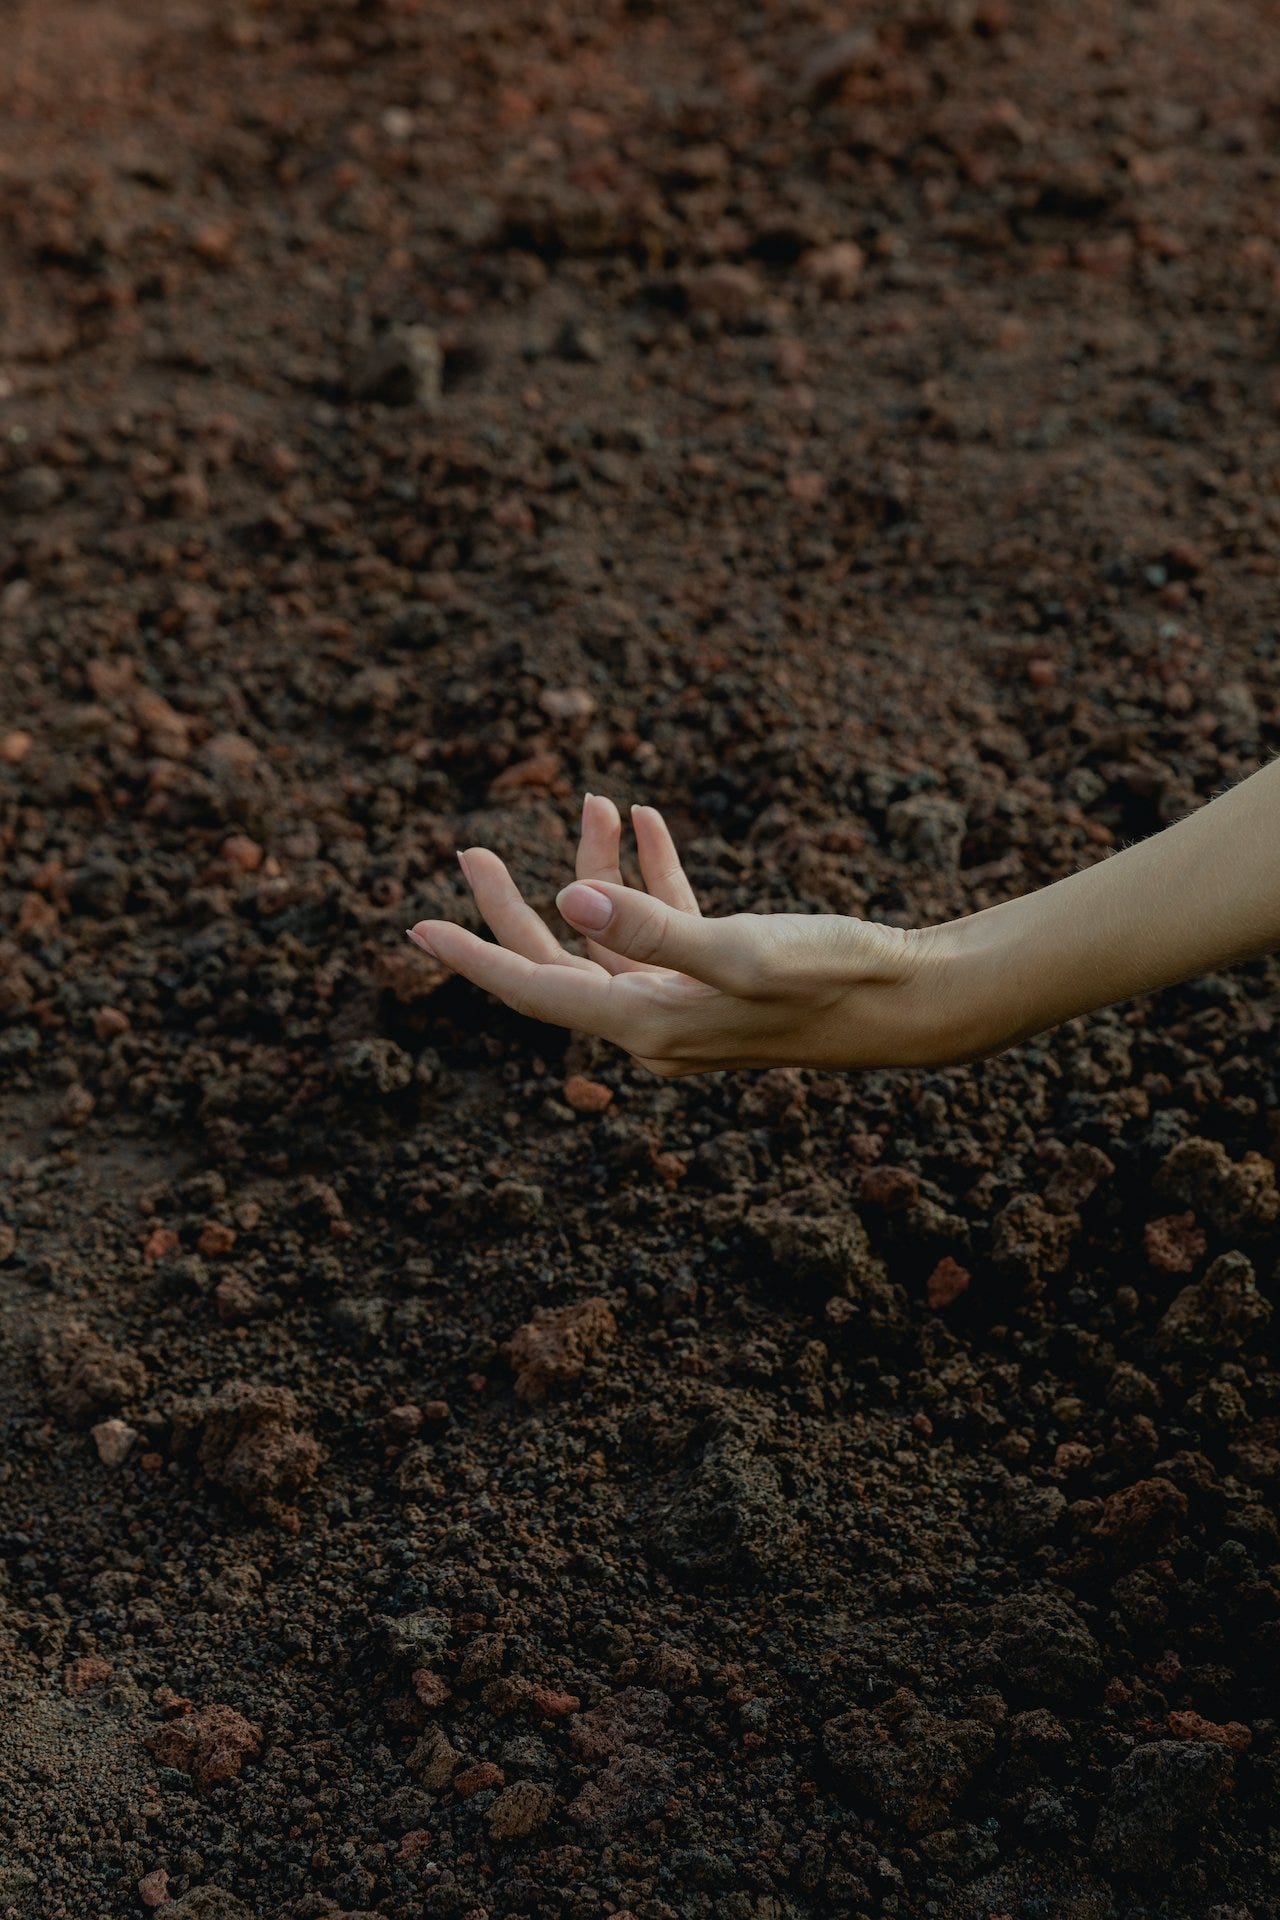 A woman's hand reaches toward the dirt, indicating something has been found.